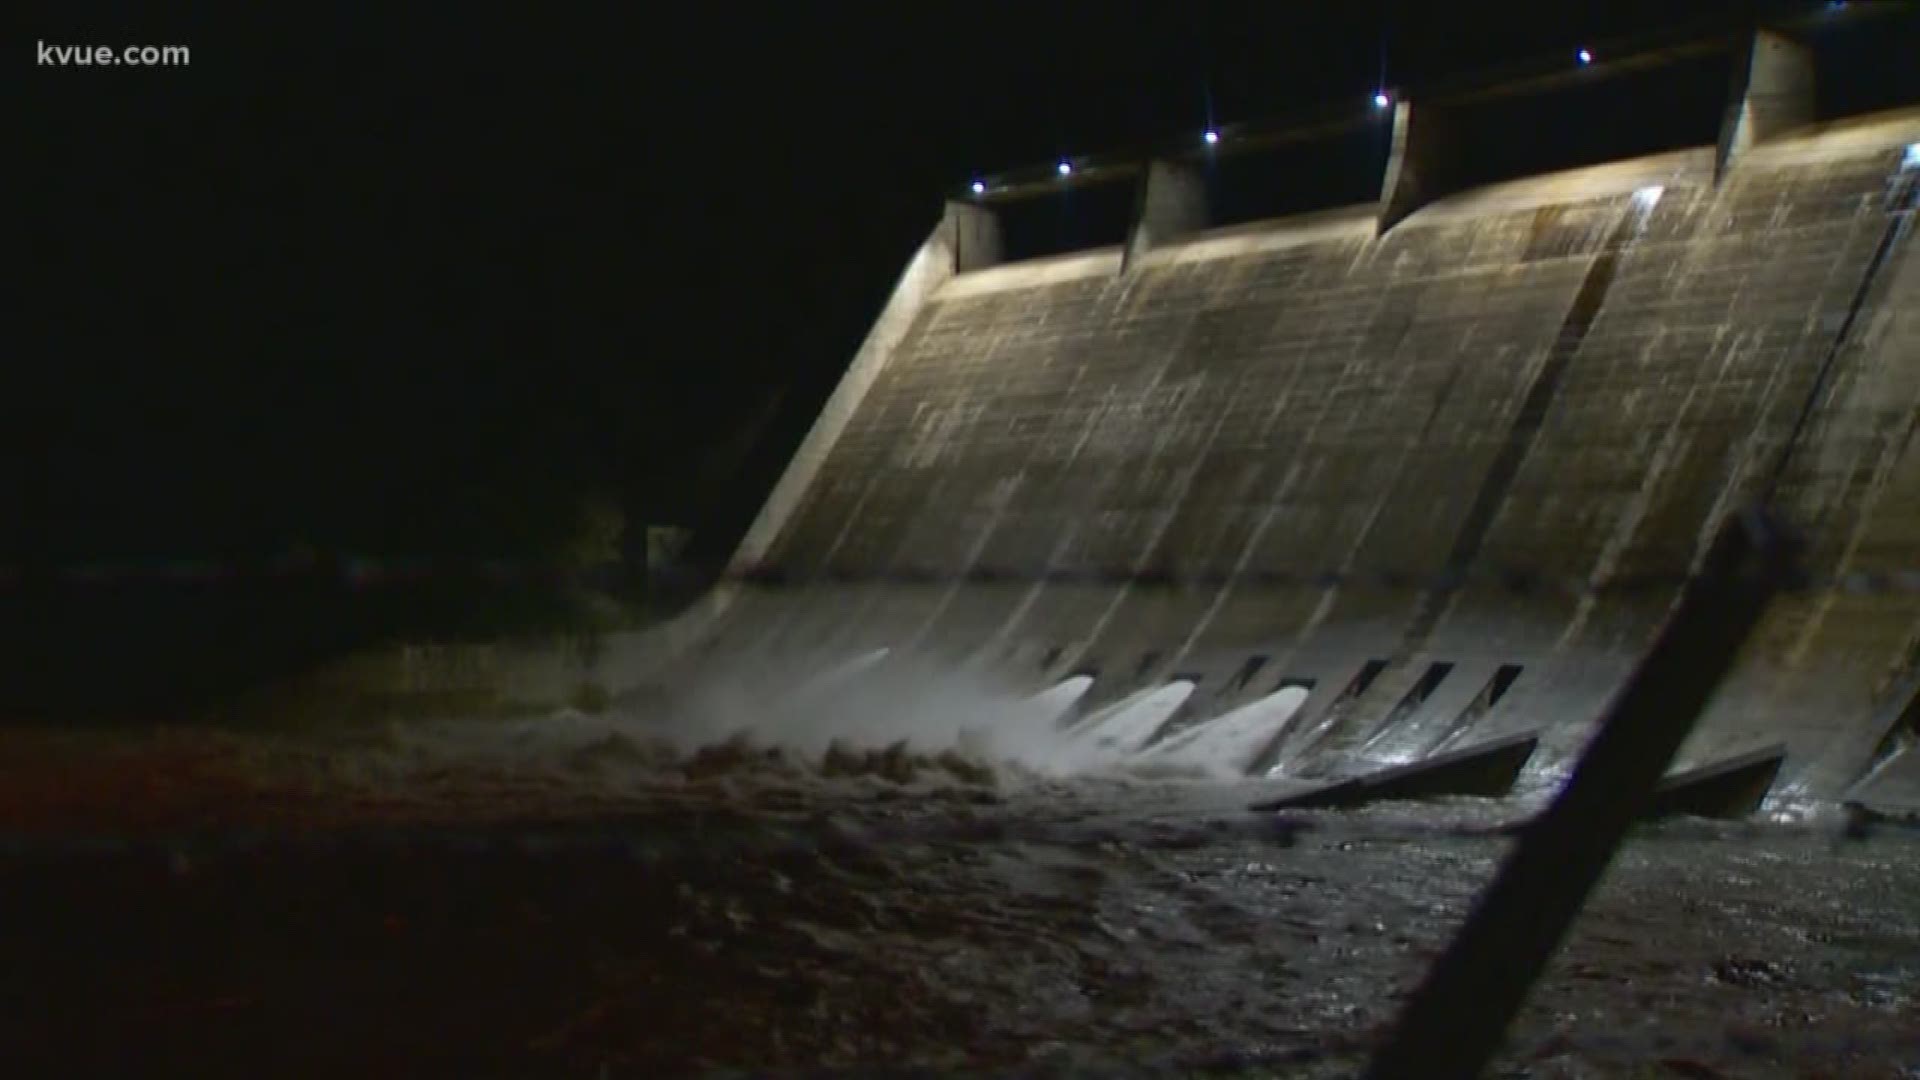 Due to all of the flooding across the Highland Lakes region, four flood gates have been opened at Mansfield Dam. Since those flood gates were opened, a strong odor has been coming from the dam.